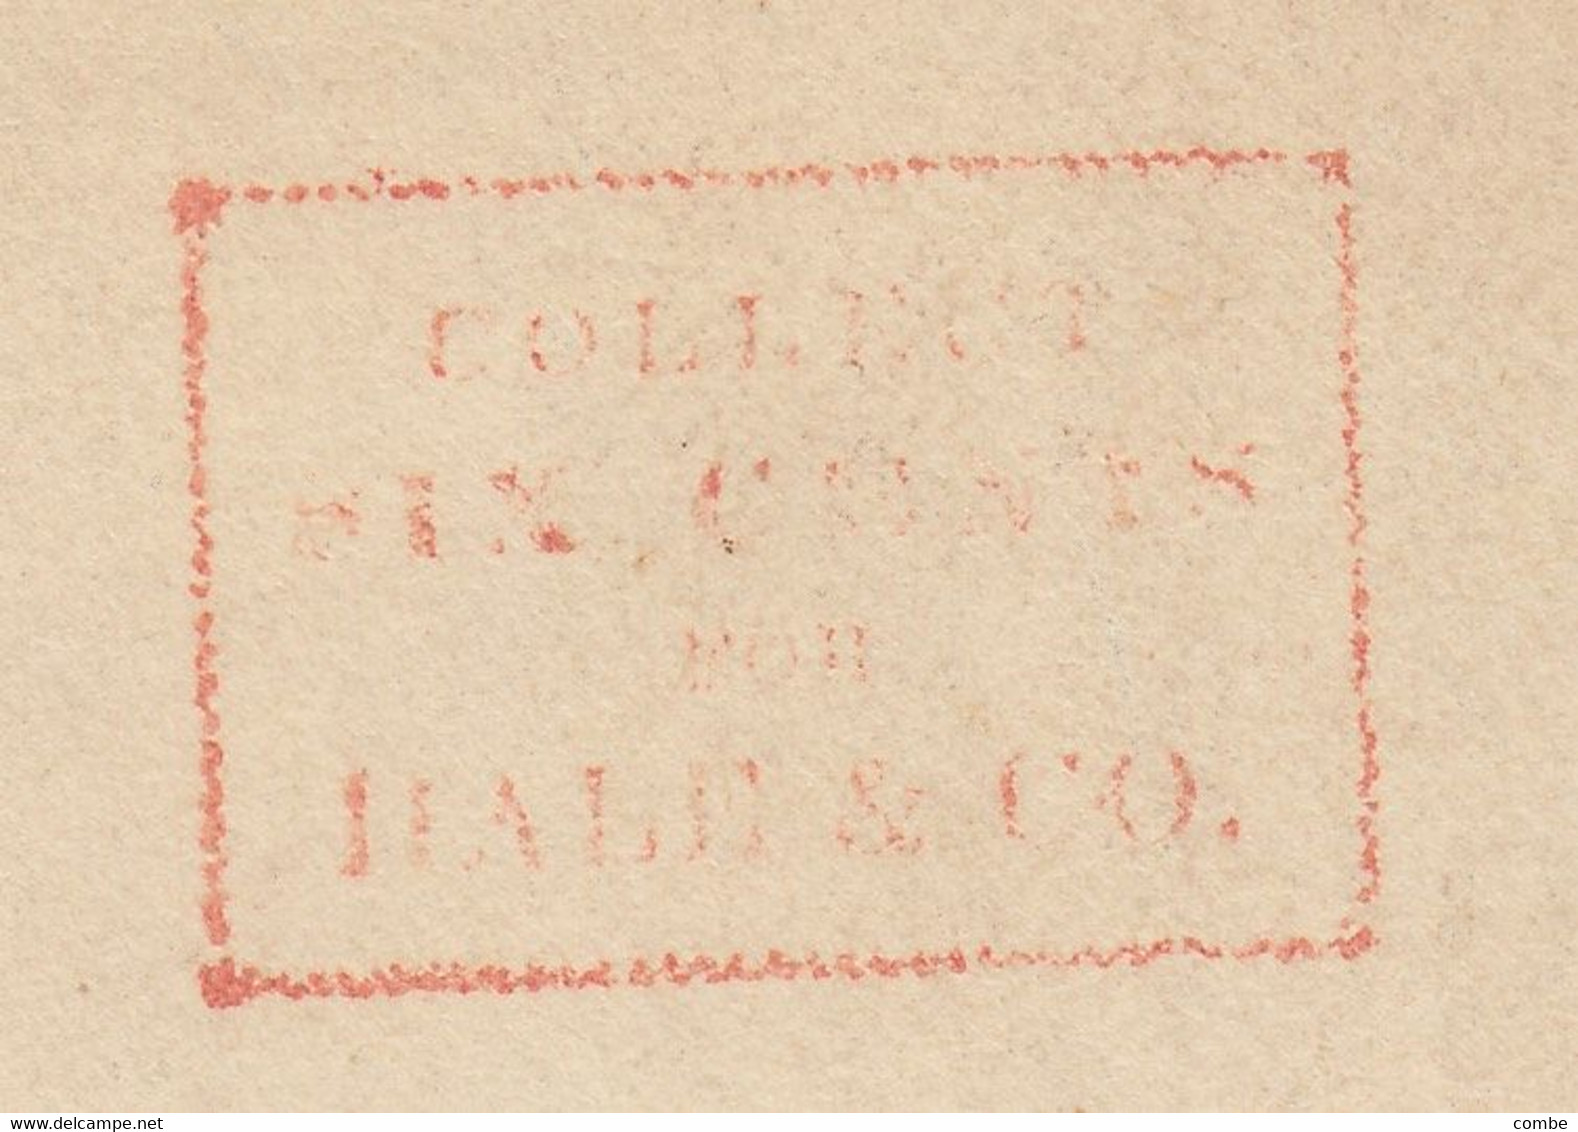 COVER. RED CANCEL  "COLLECT SIX CENTS FOR HALE & C°". NEW-YORK. NO TEXT      / 2 - …-1845 Prefilatelia